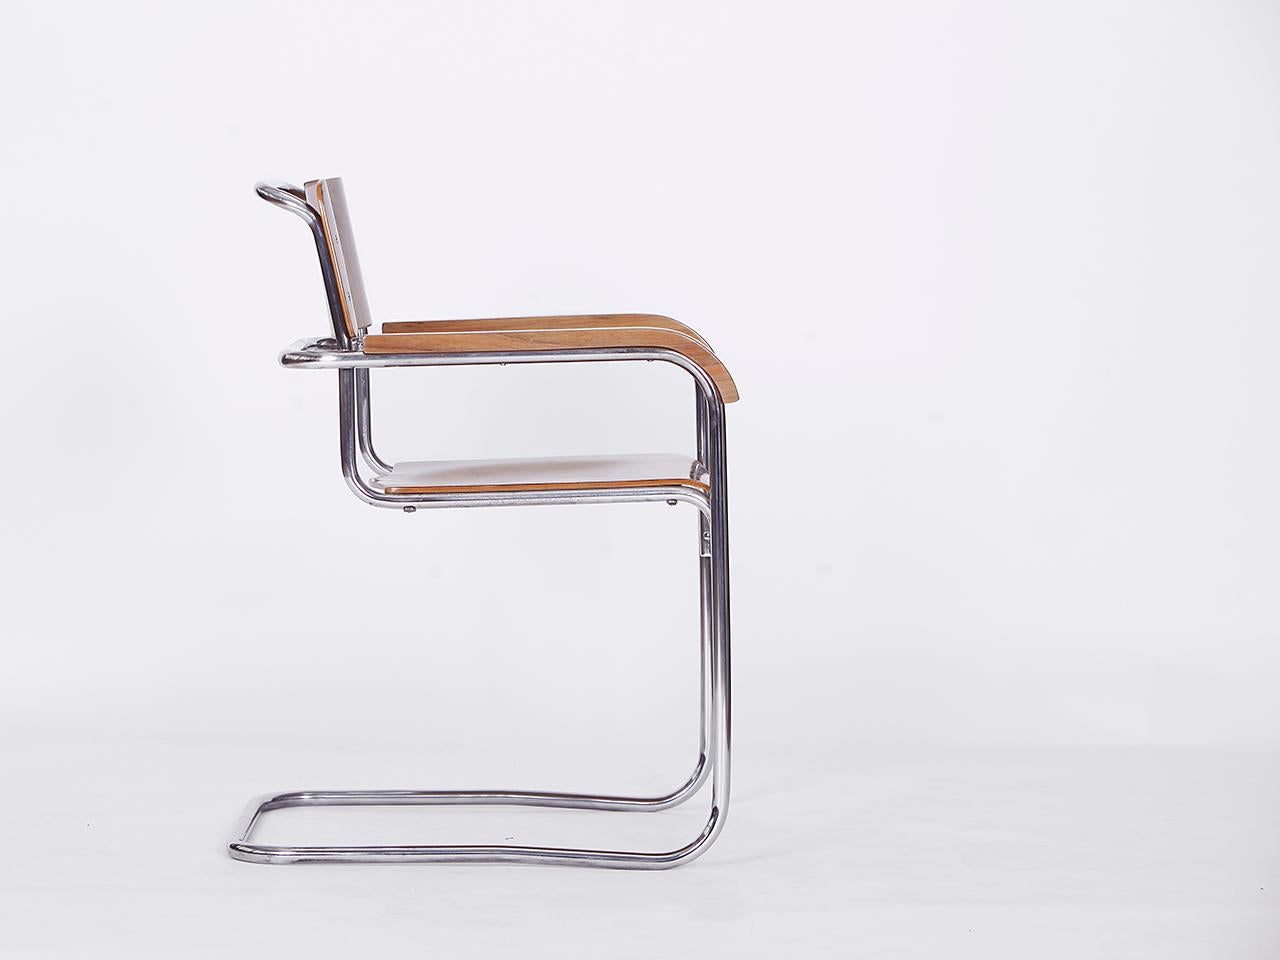 Functionalist Tubular Steel Desk by Gottwald and Chair by Slezak 1930s For Sale 8